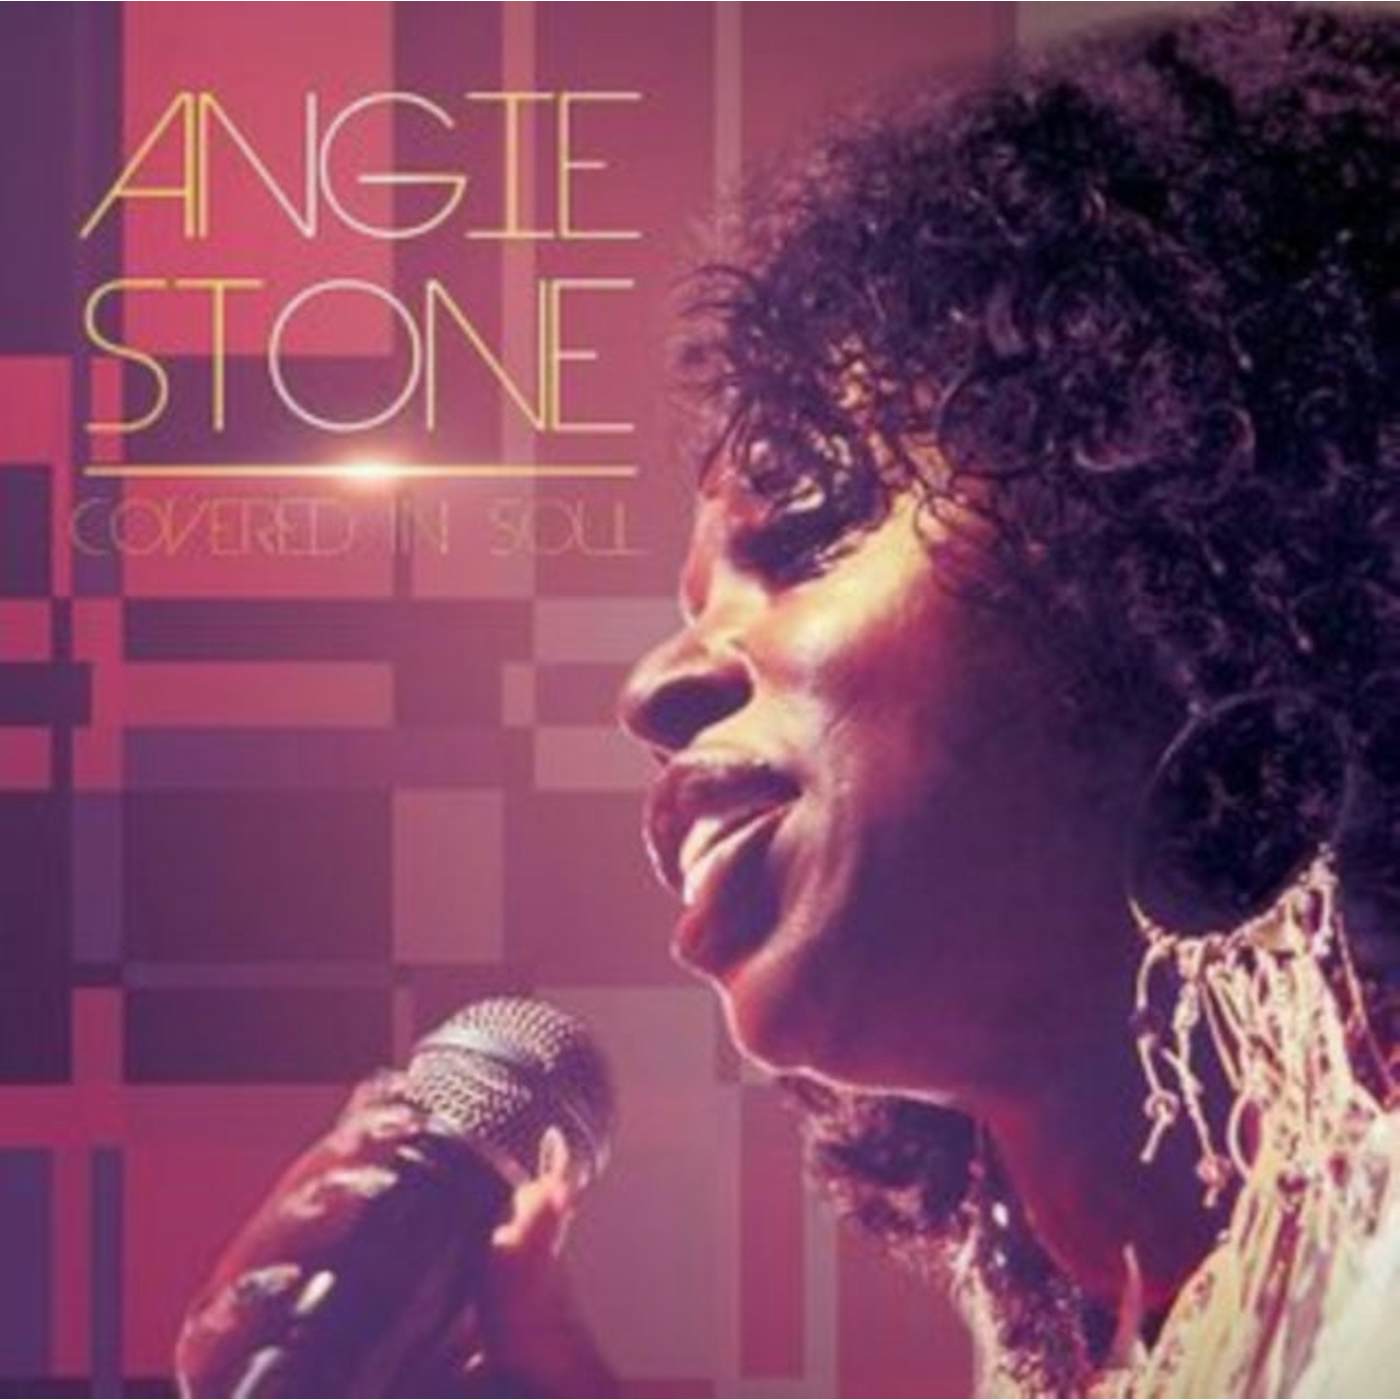 Angie Stone LP - Covered In Soul (Vinyl)